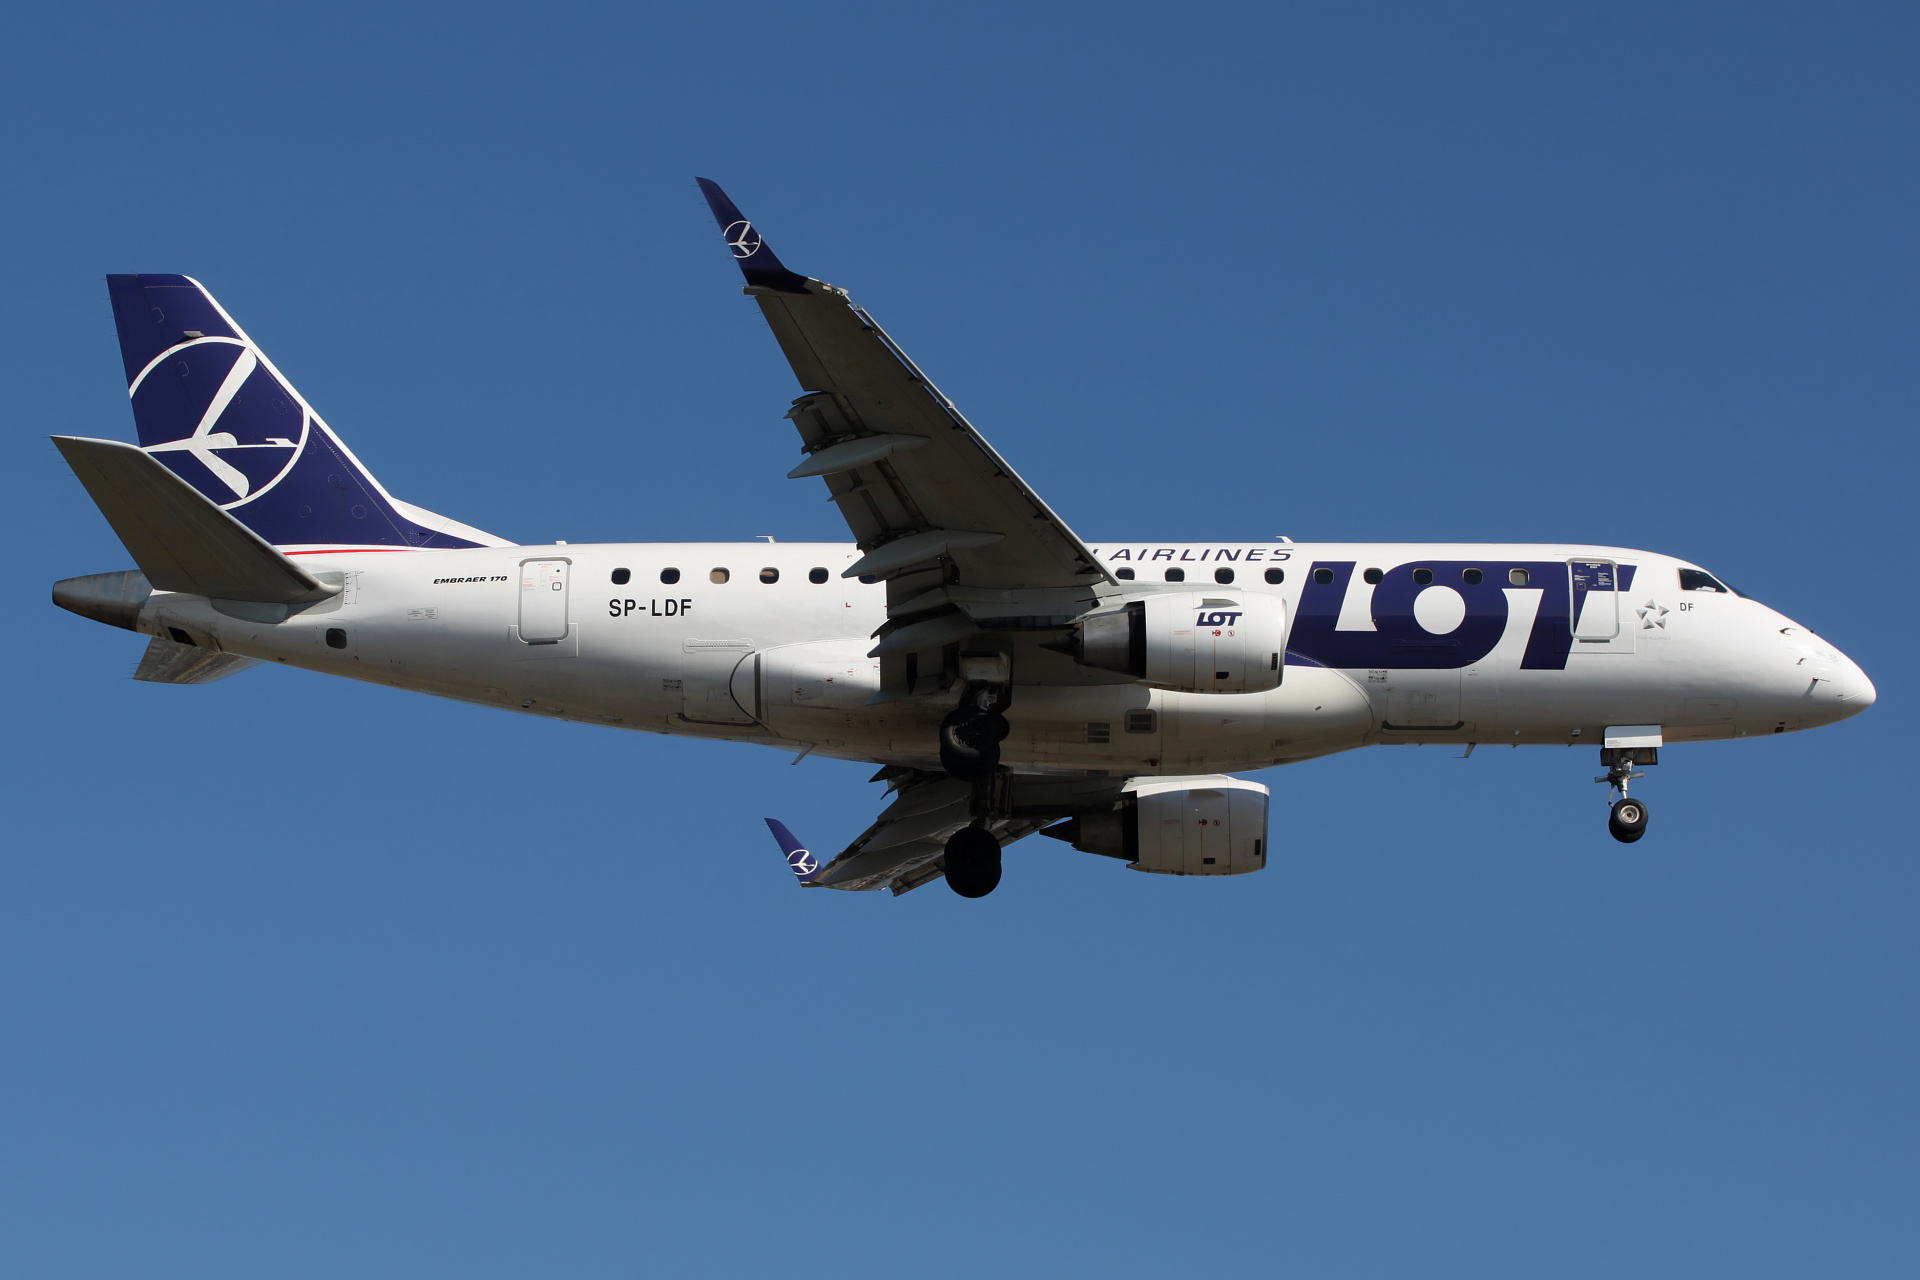 SP-LDF (new livery) (Aircraft » EPWA Spotting » Embraer E170 » LOT Polish Airlines)